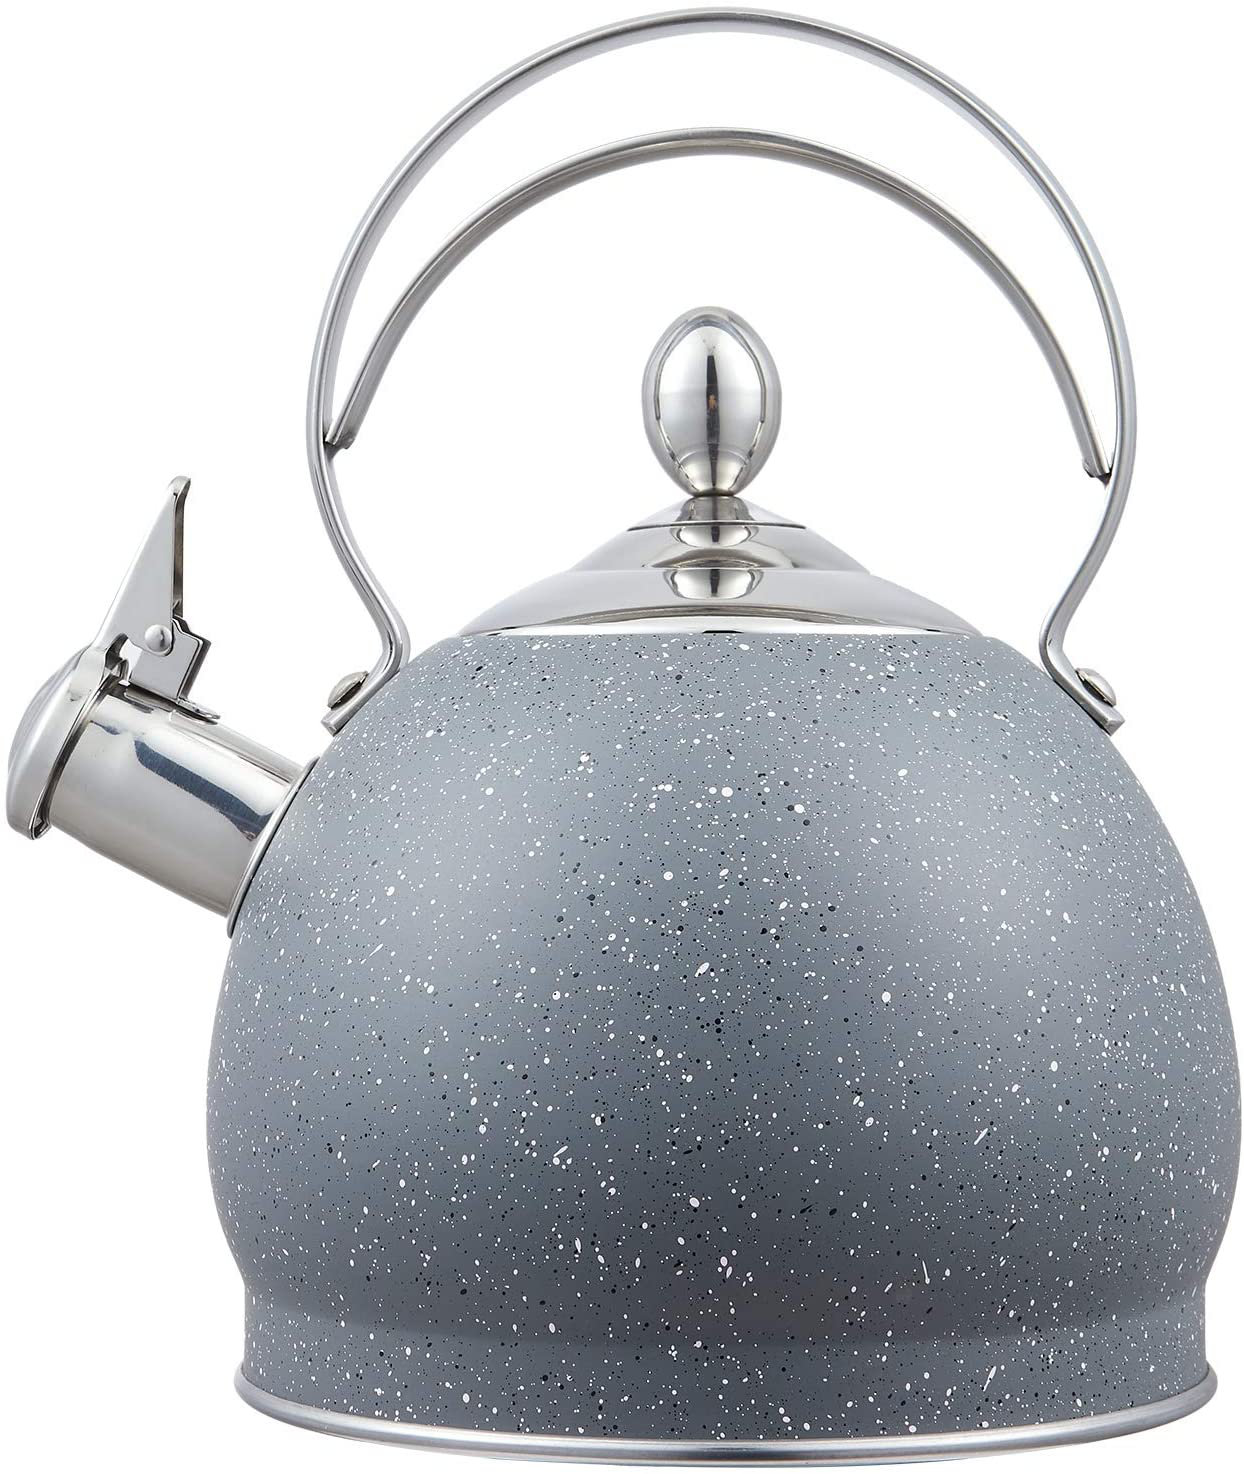 Whistle Tea Kettle For Stove Top, Stainless Steel Large Capacity